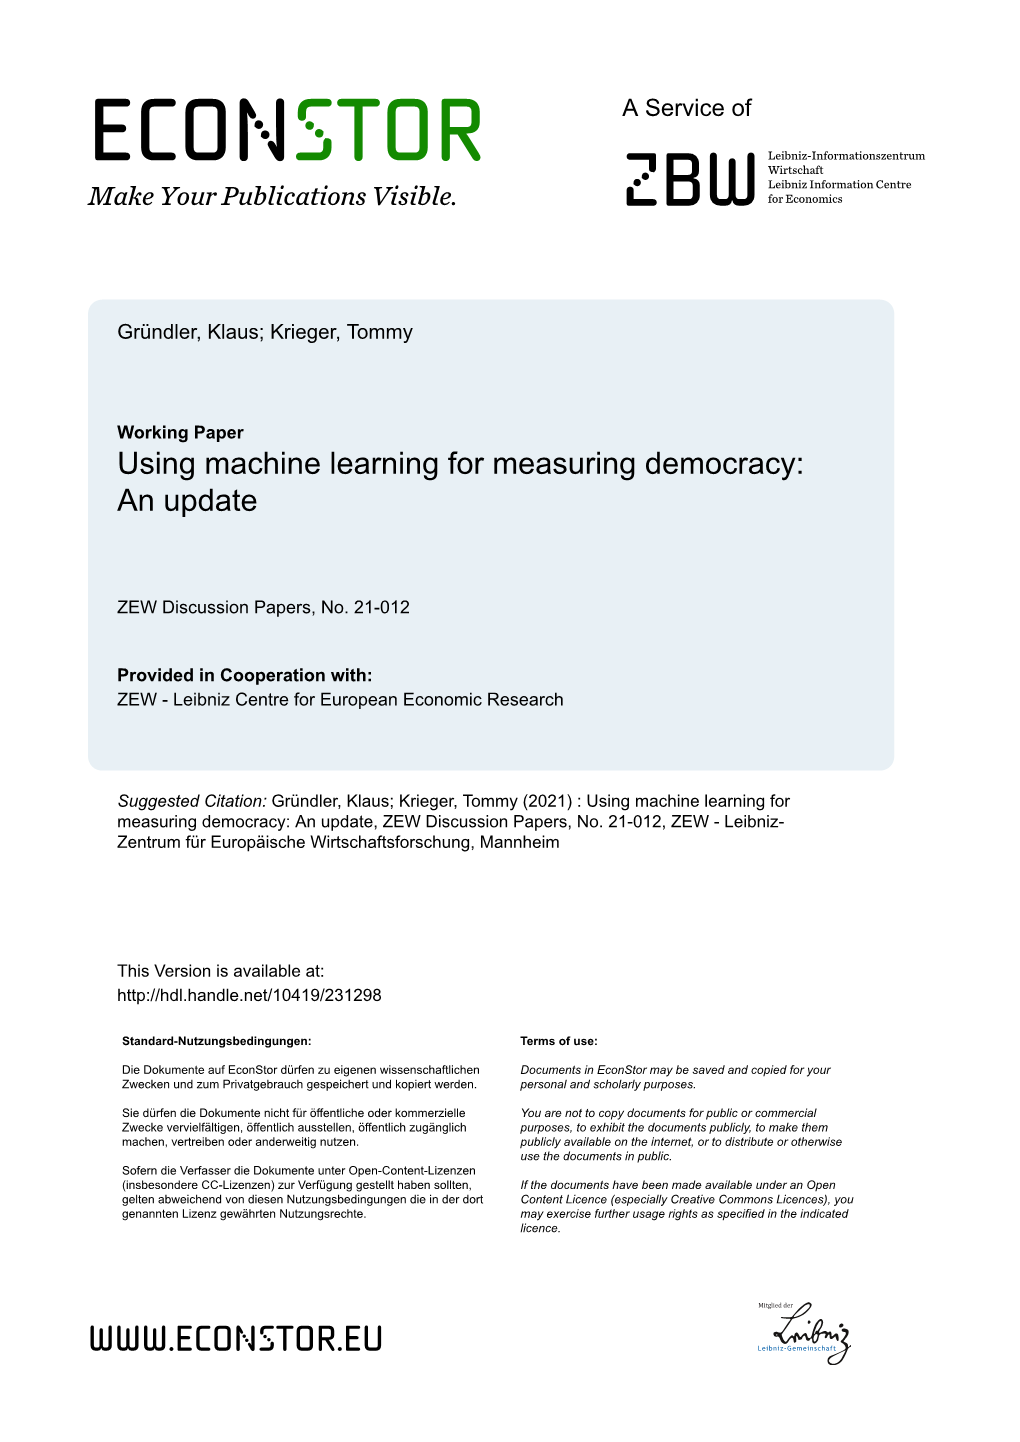 Using Machine Learning for Measuring Democracy: an Update